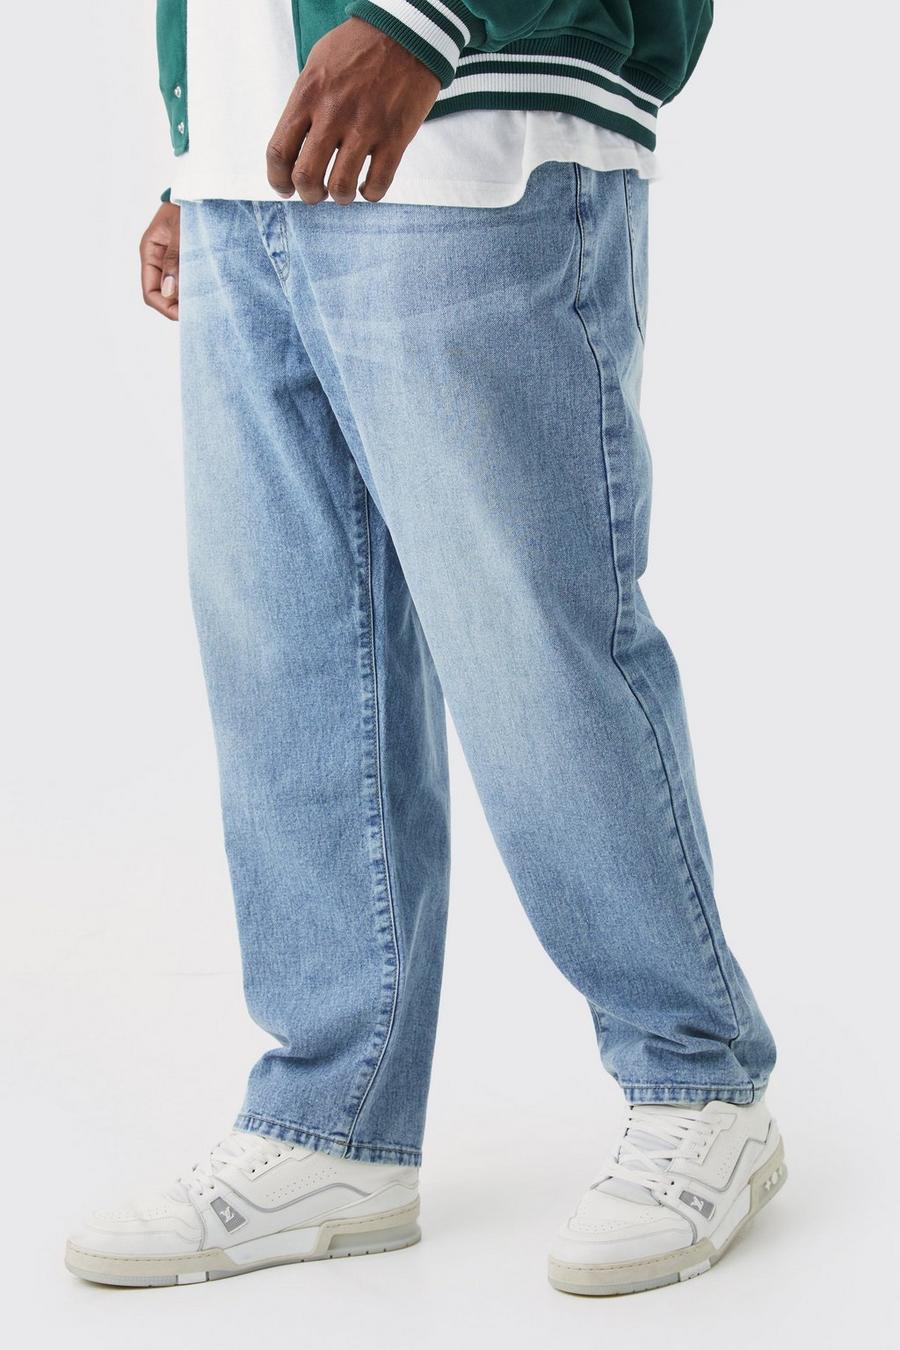 Large Size Jeans Men Straight, Big Tall Mens Jeans Cheap